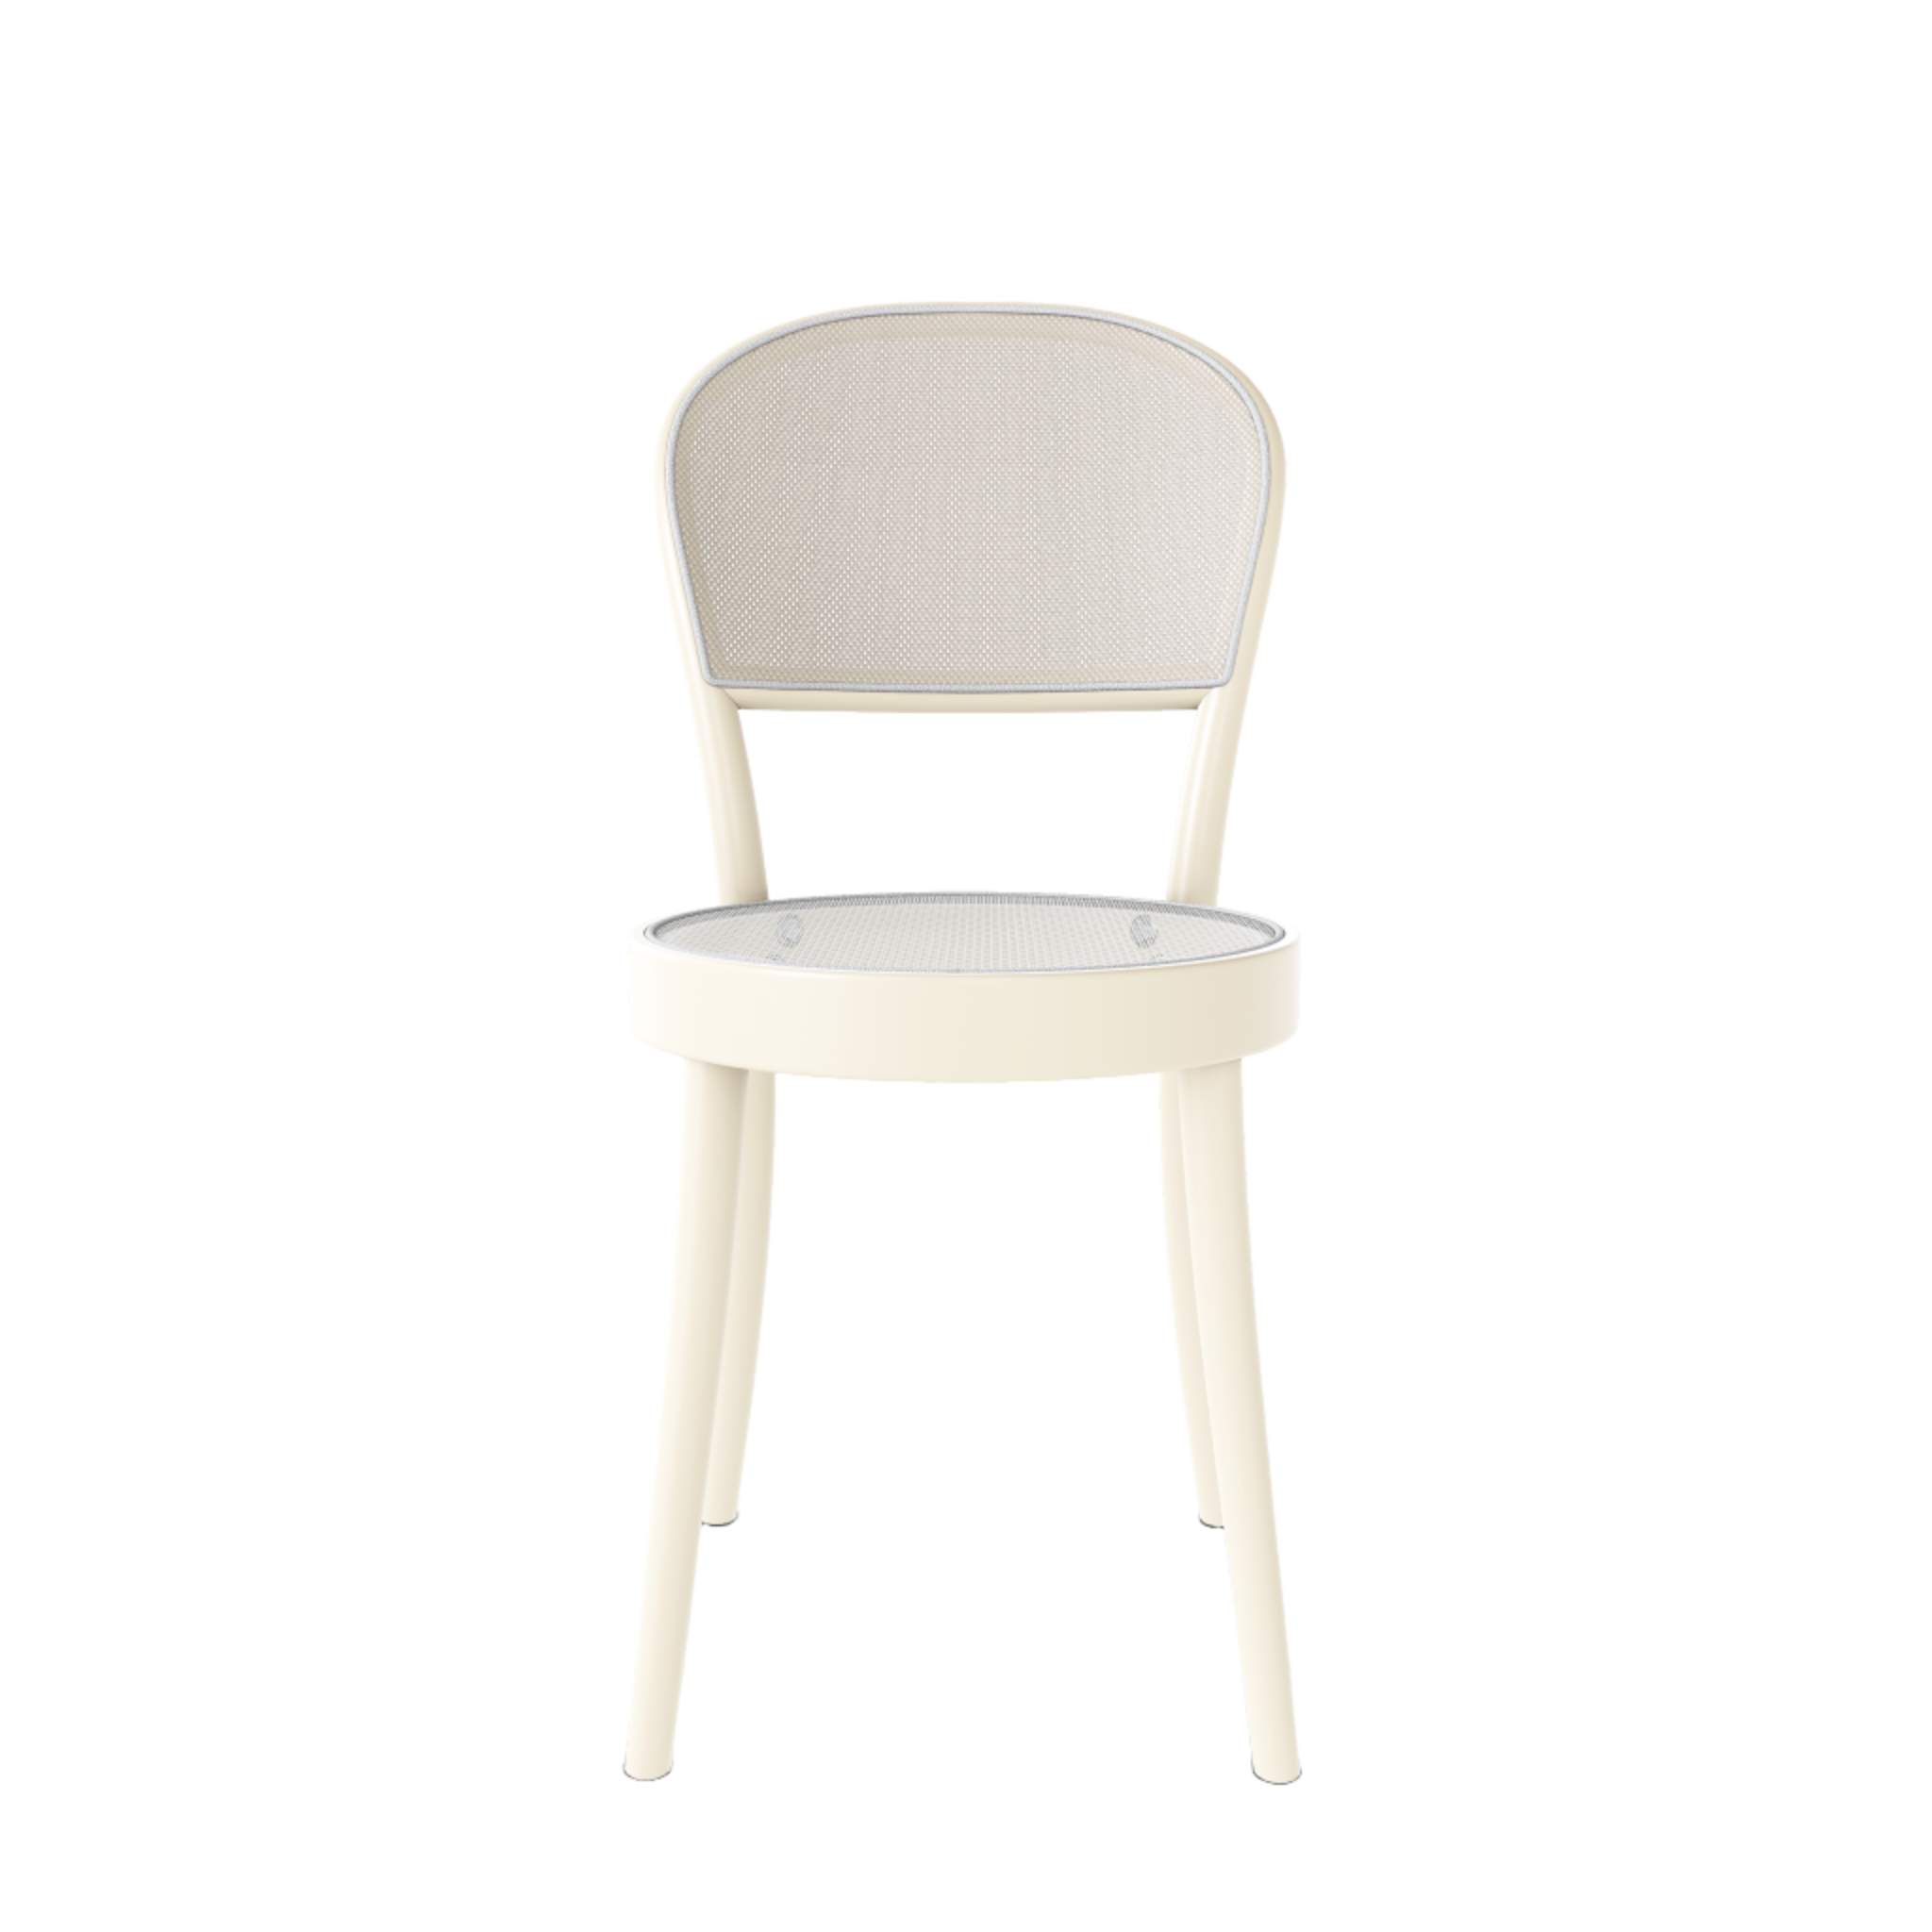 Ton 314 chair with matching seat mesh in mocca beige